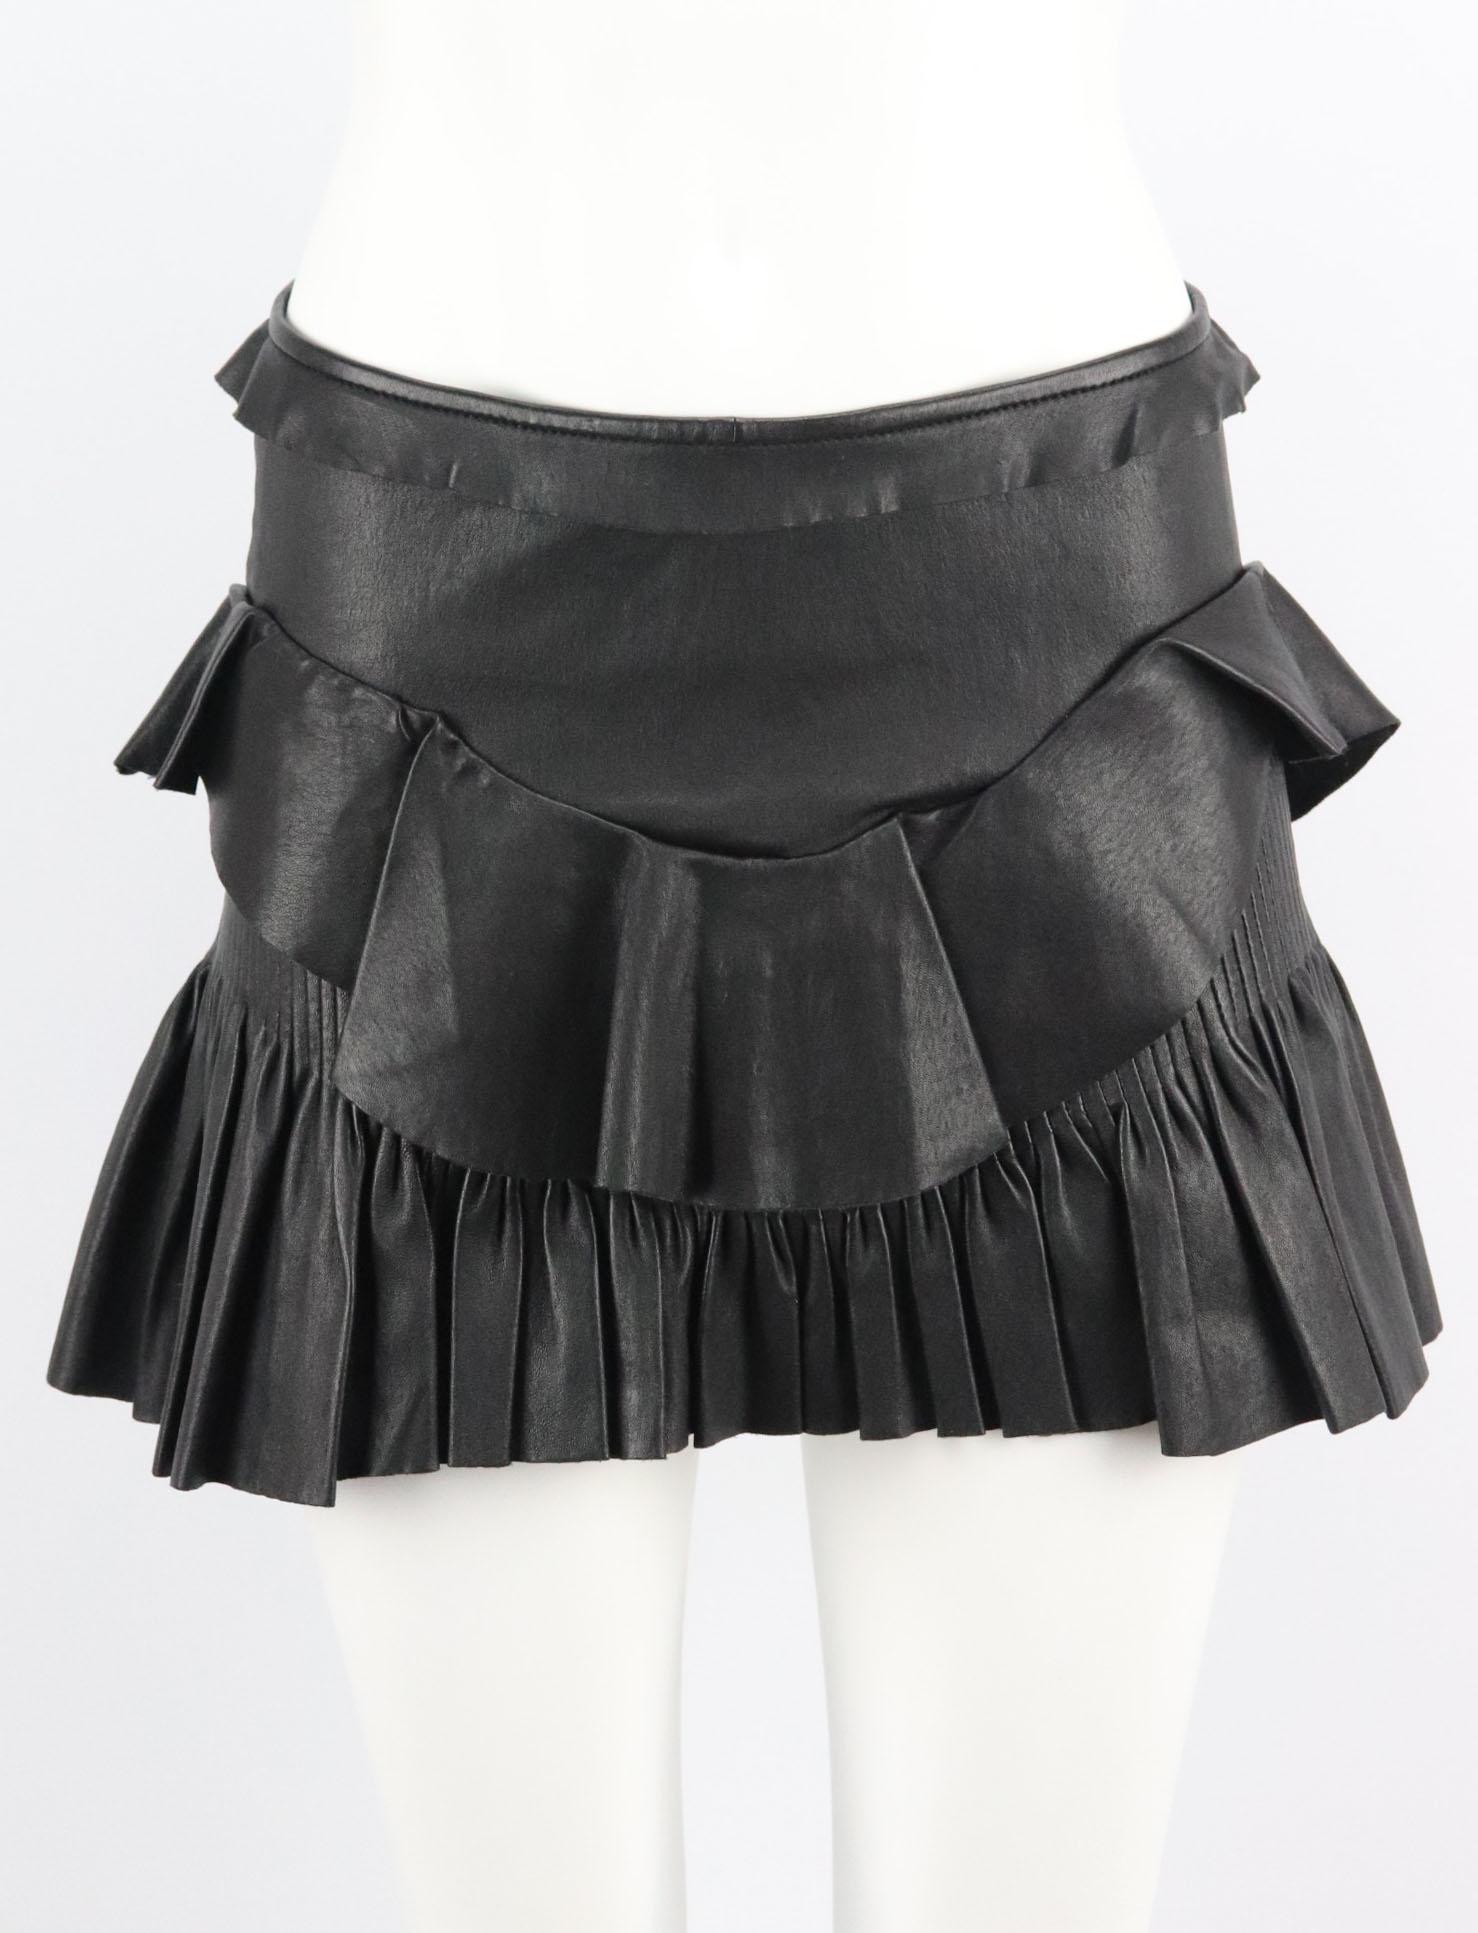 This Cyan mini skirt by Isabel Marant is cut from buttery soft stretch-leather with tiered pleated ruffle detail throughout.
Black leather.
Concealed hook and zip fastening at back.
100% Leather (Lamb); backing: 97% cotton, 3% elastane.

Size: FR 38